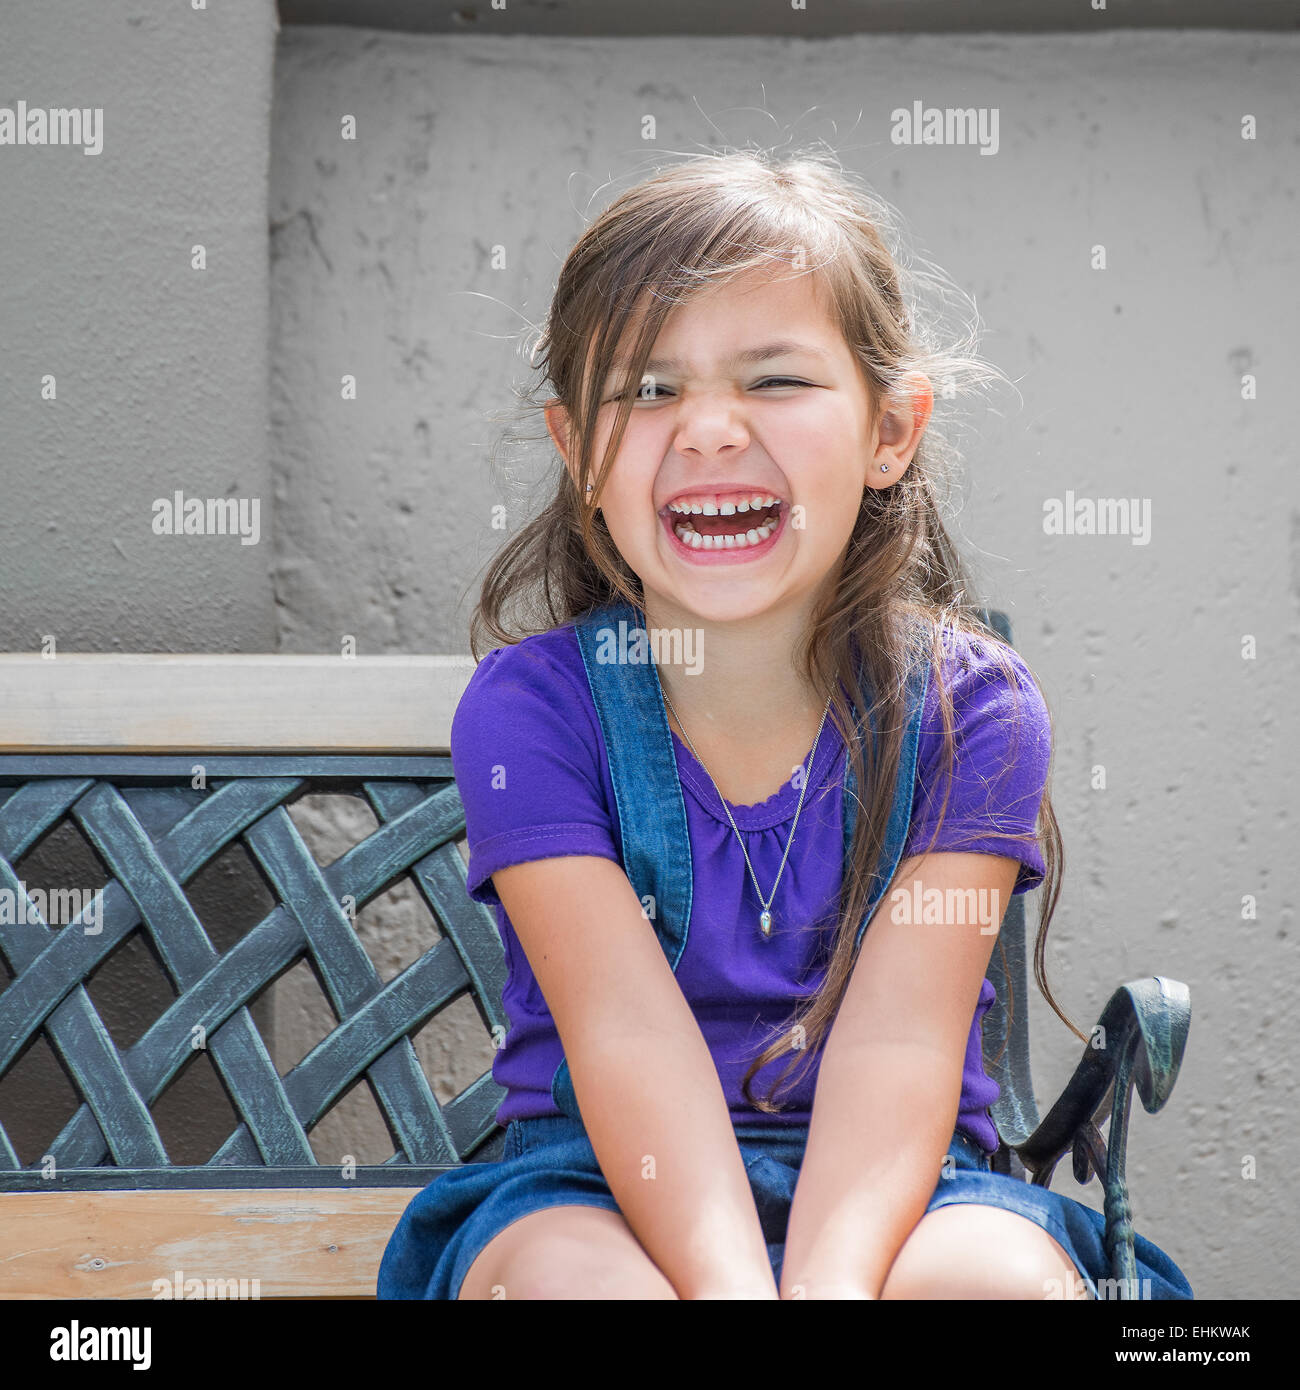 Little girl sits laughing on outside bench. Stock Photo